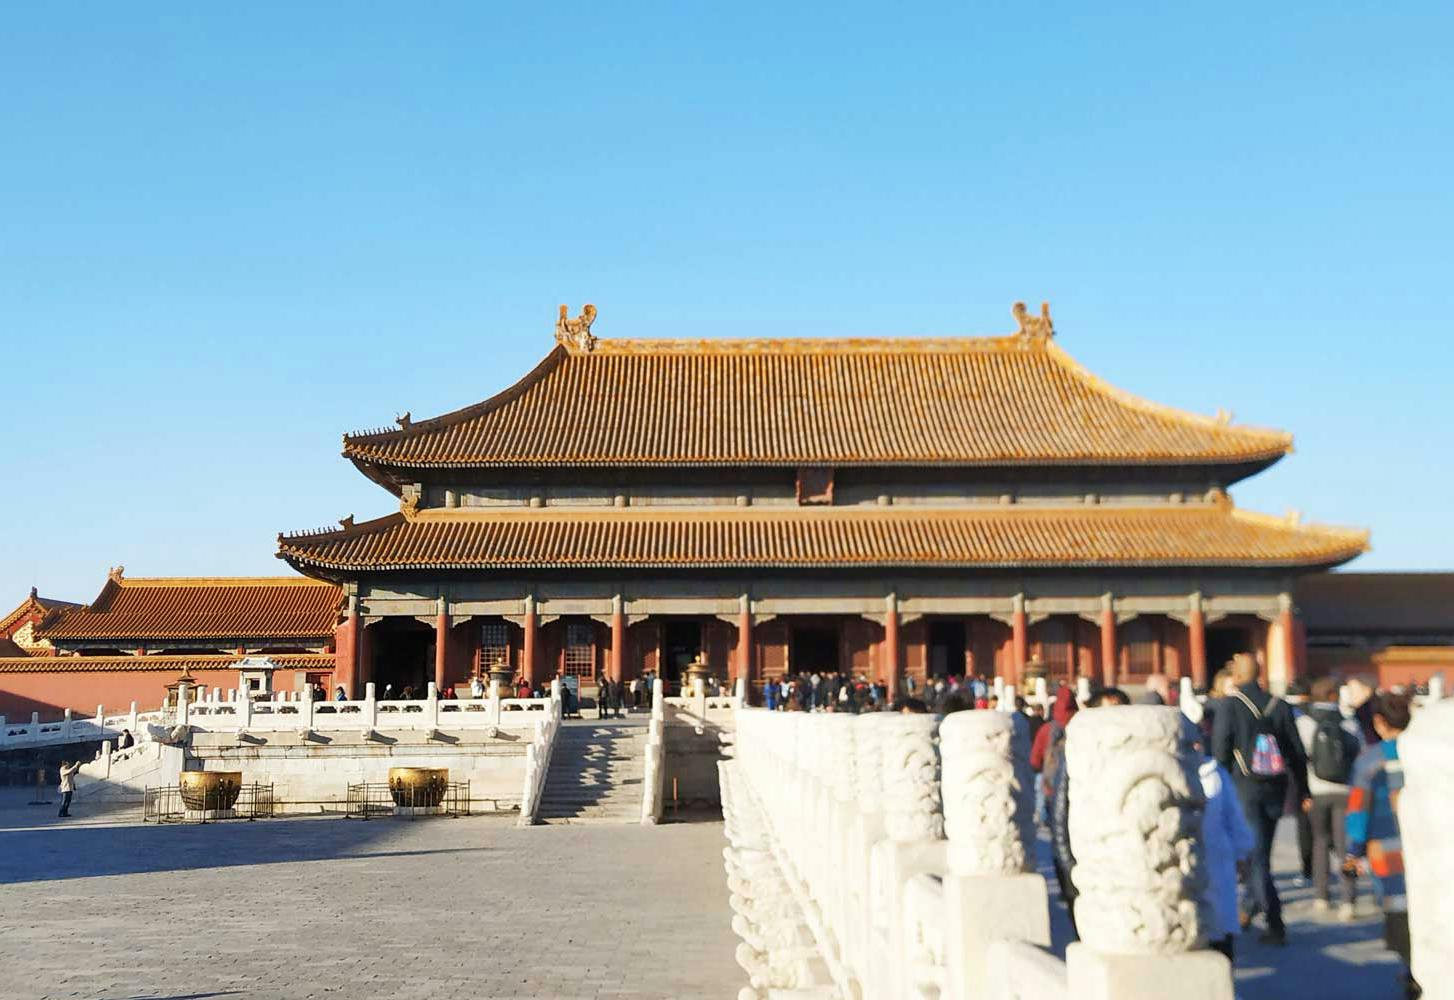 Beijing Private Tour of Tiananmen Square, Forbidden City and Mutianyu Great Wall Musement